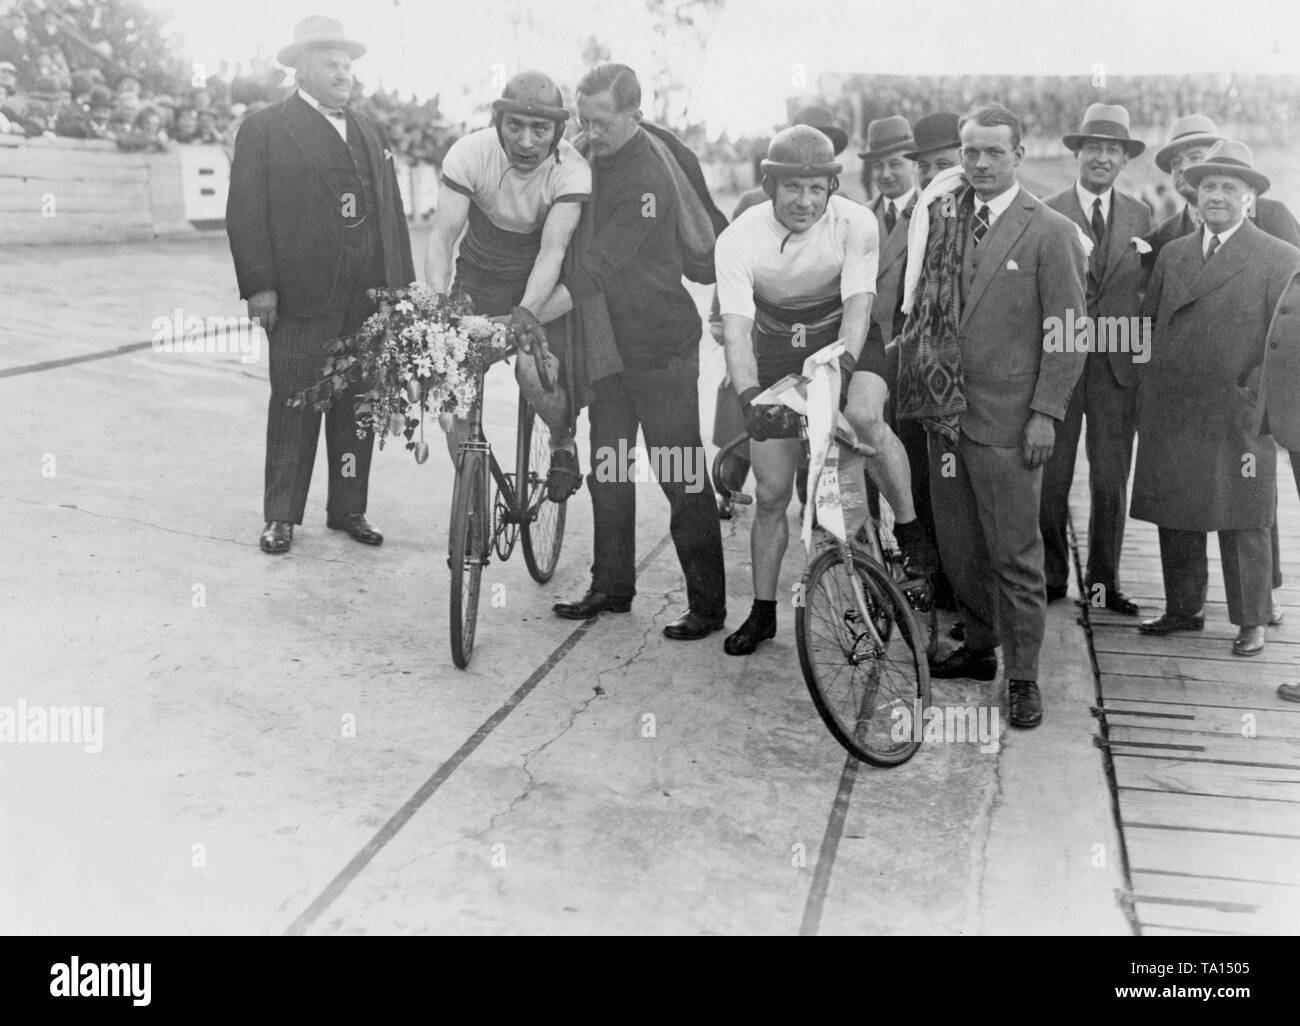 The two participants of the Grand Whitsun Prize, 1929, are ready to race on the Olympic cycling track in Berlin. On the right, German race driver Walter Sawall. Next to him, the Frenchman Charles Pelissier. Stock Photo